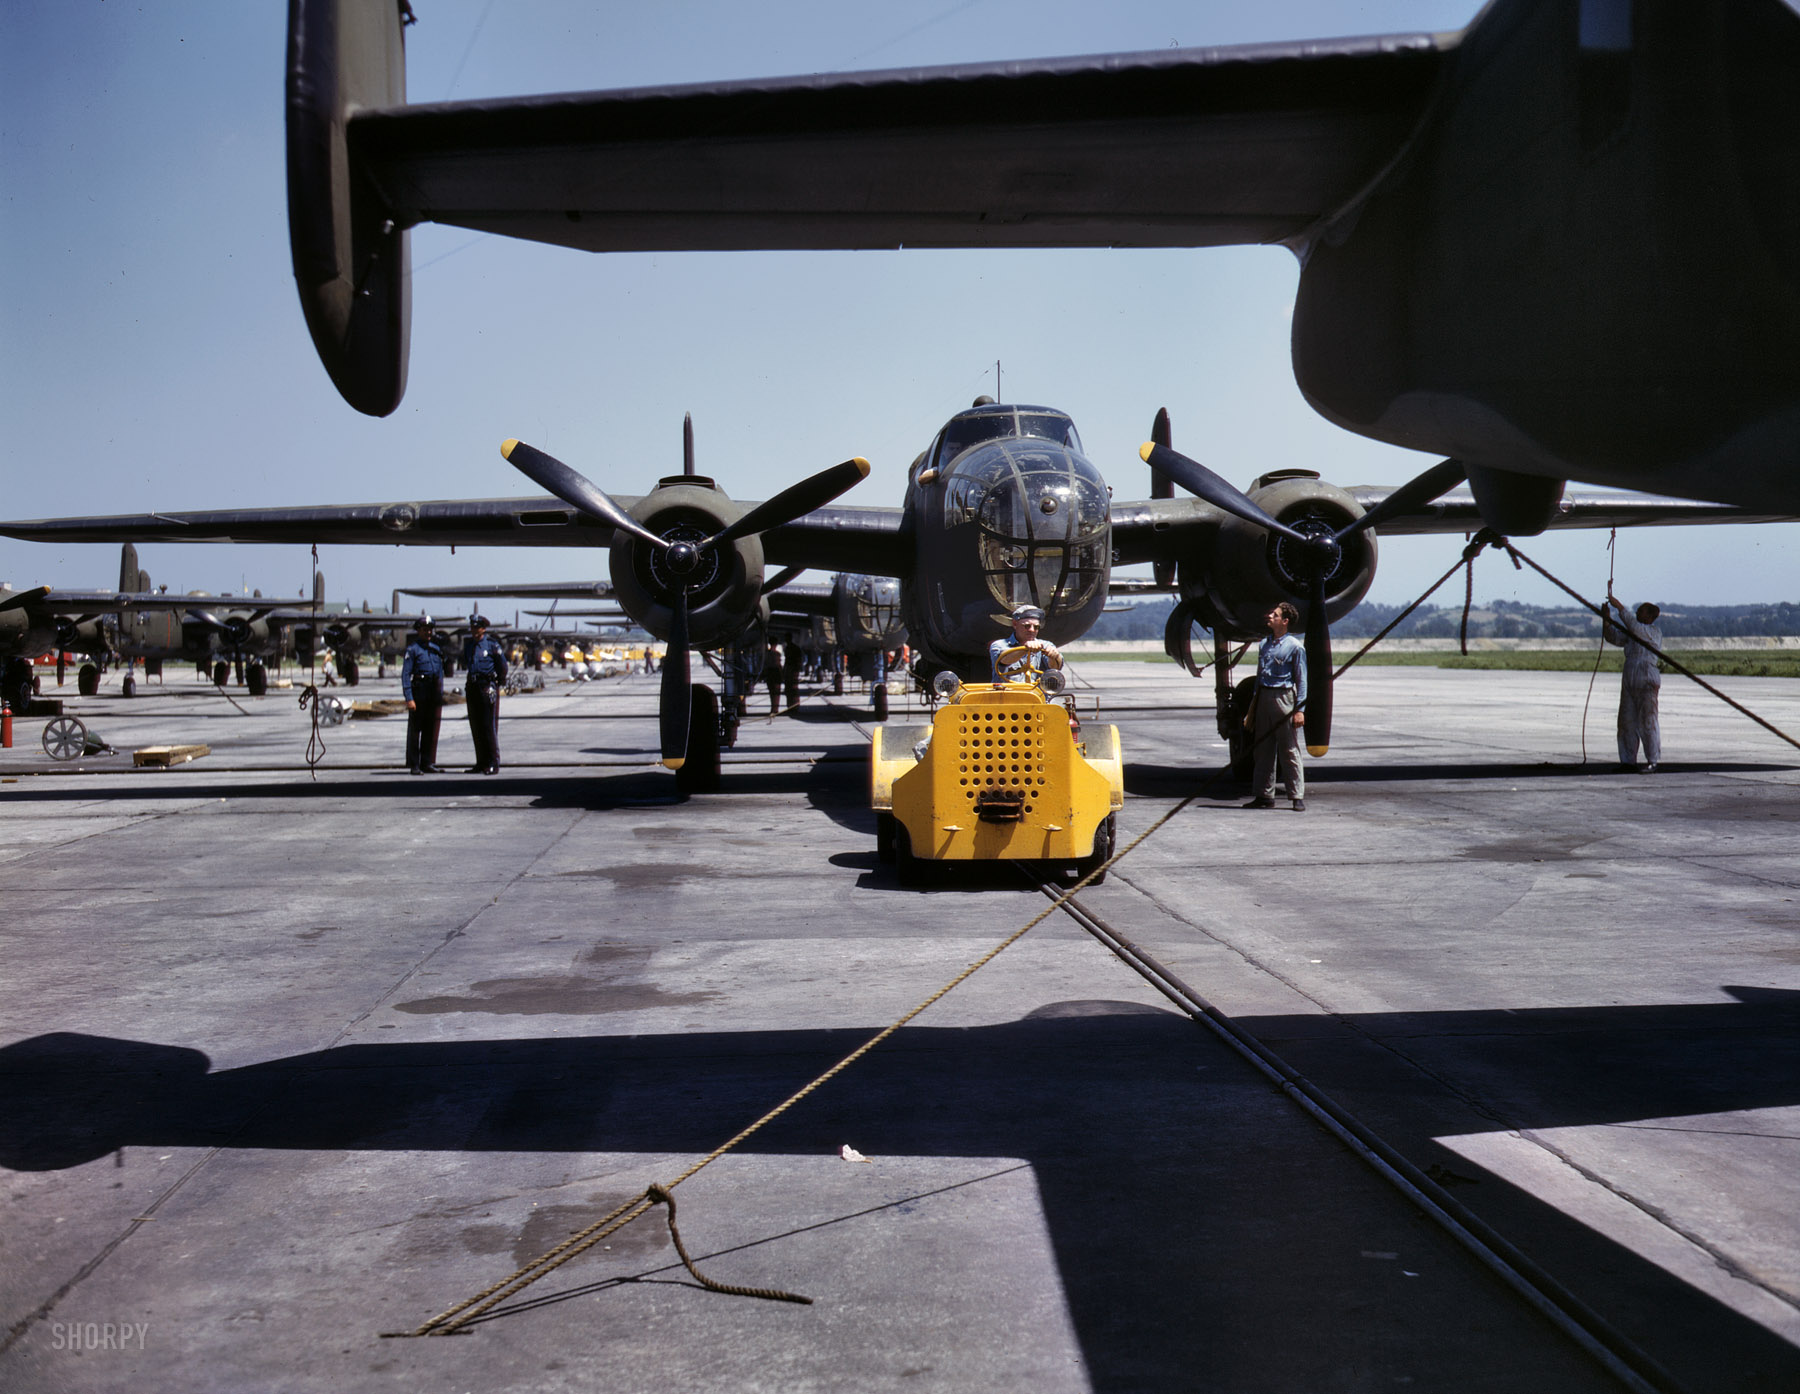 October 1942. "A new B-25 bomber is brought for a test hop to the flight line at the Kansas City, Kansas, plant of North American Aviation." 4x5 Kodachrome transparency by Alfred Palmer, Office of War Information. View full size.